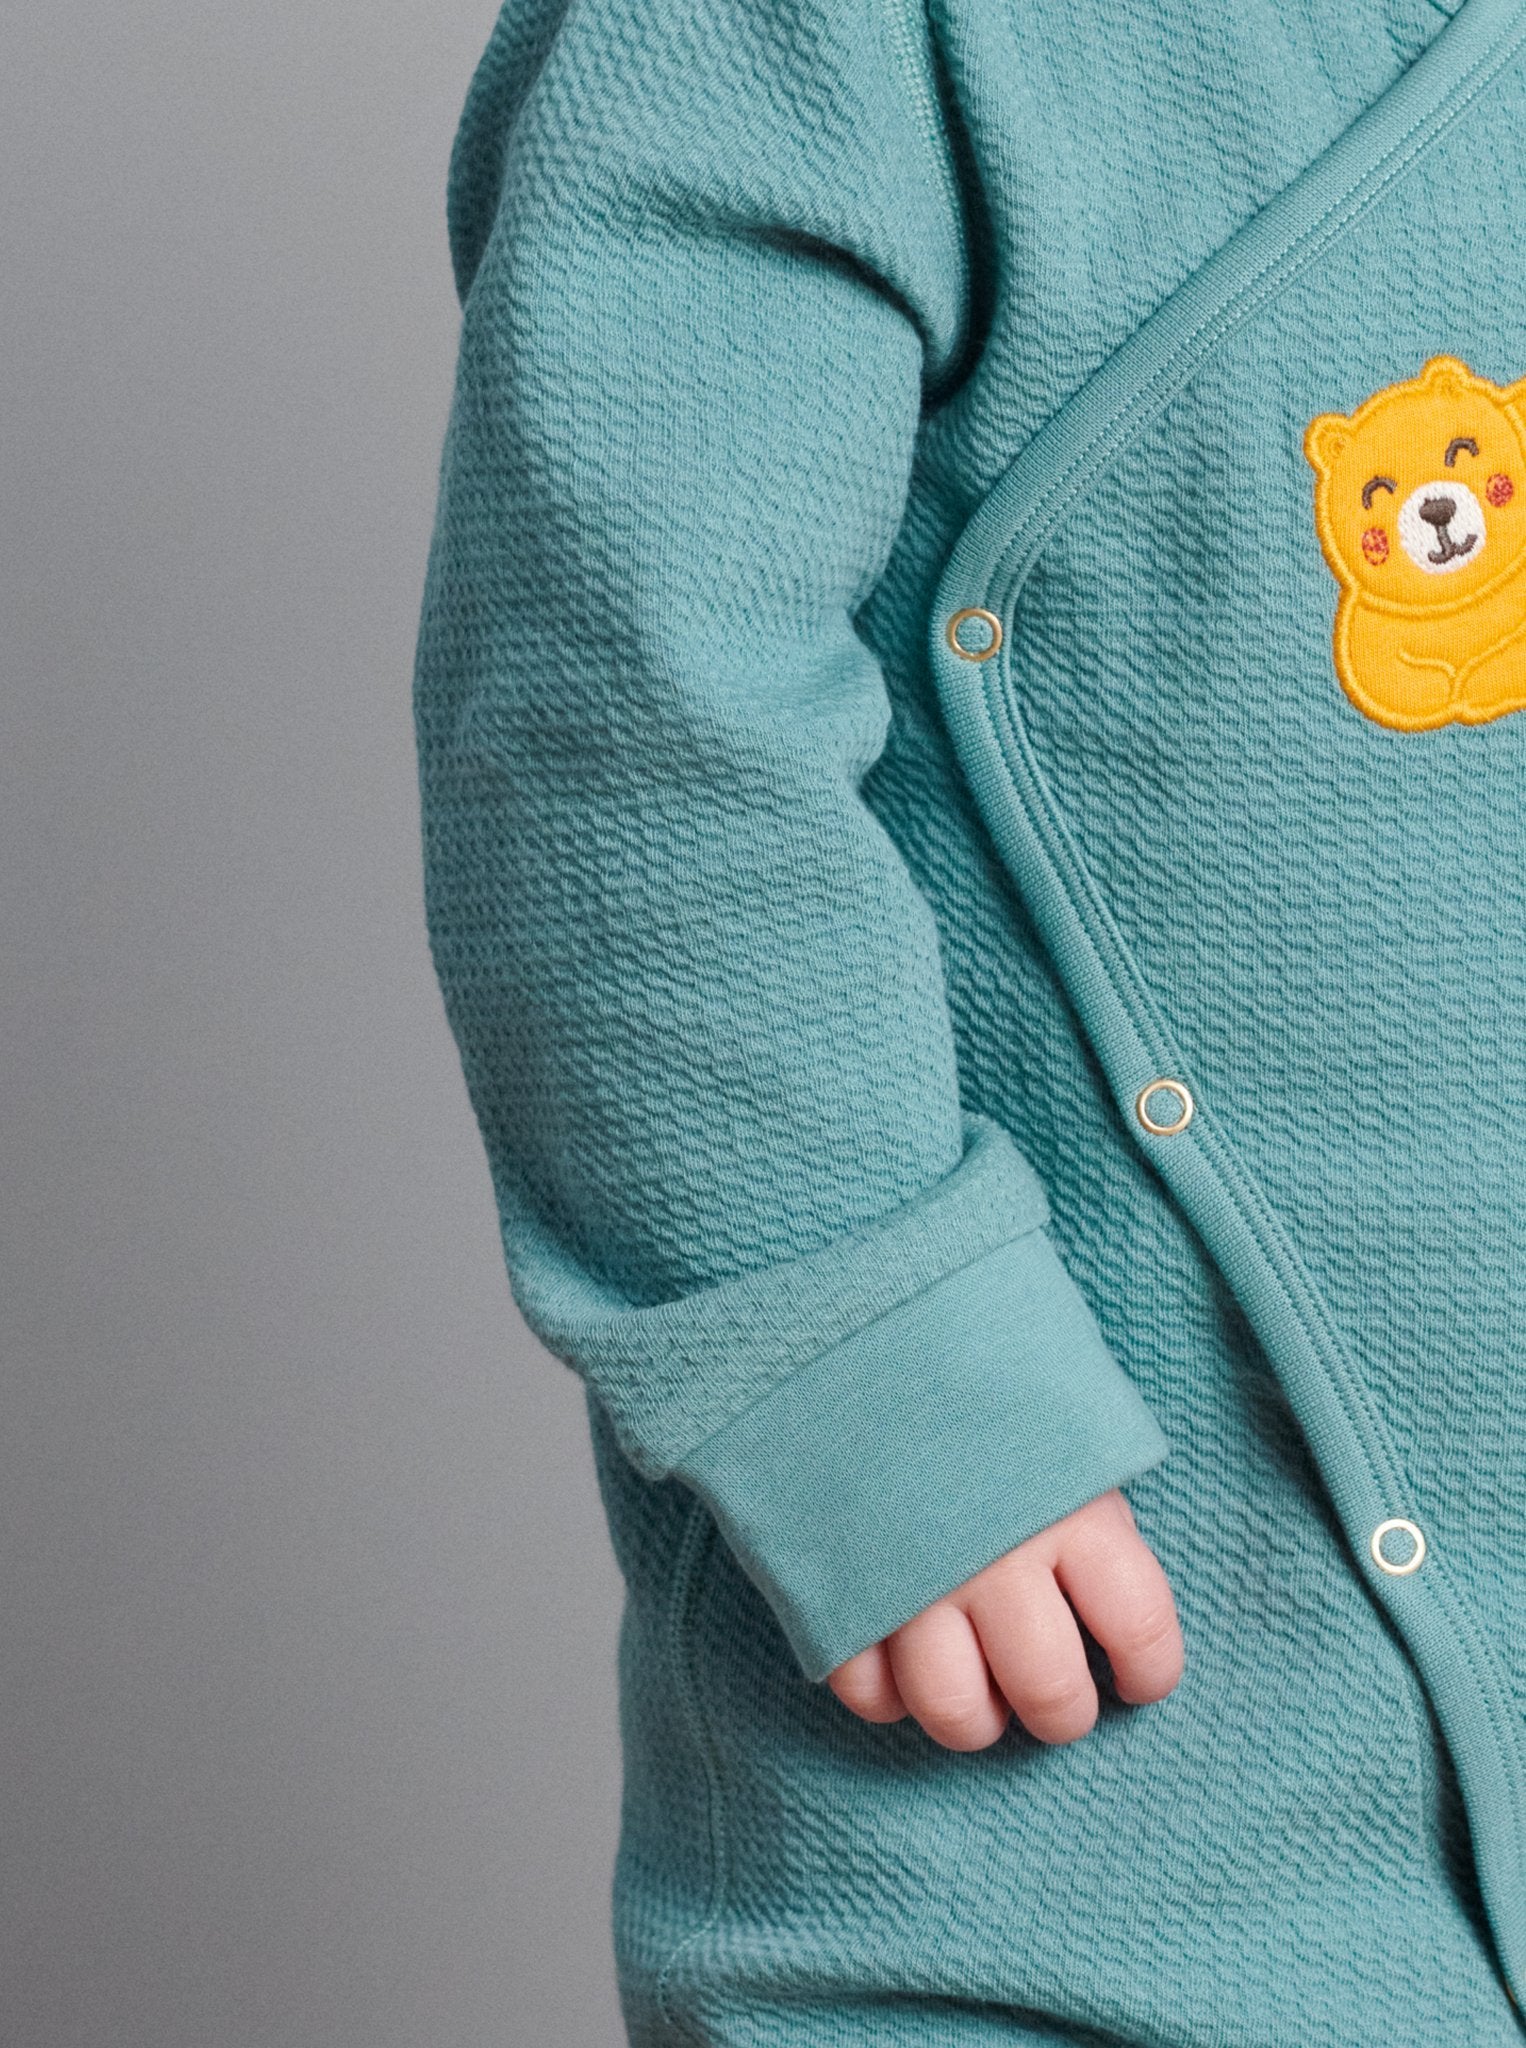 Close up of textured sleeve detail on wraparound baby onesie. Made in GOTS organic cotton with adorable sleeping bear applique